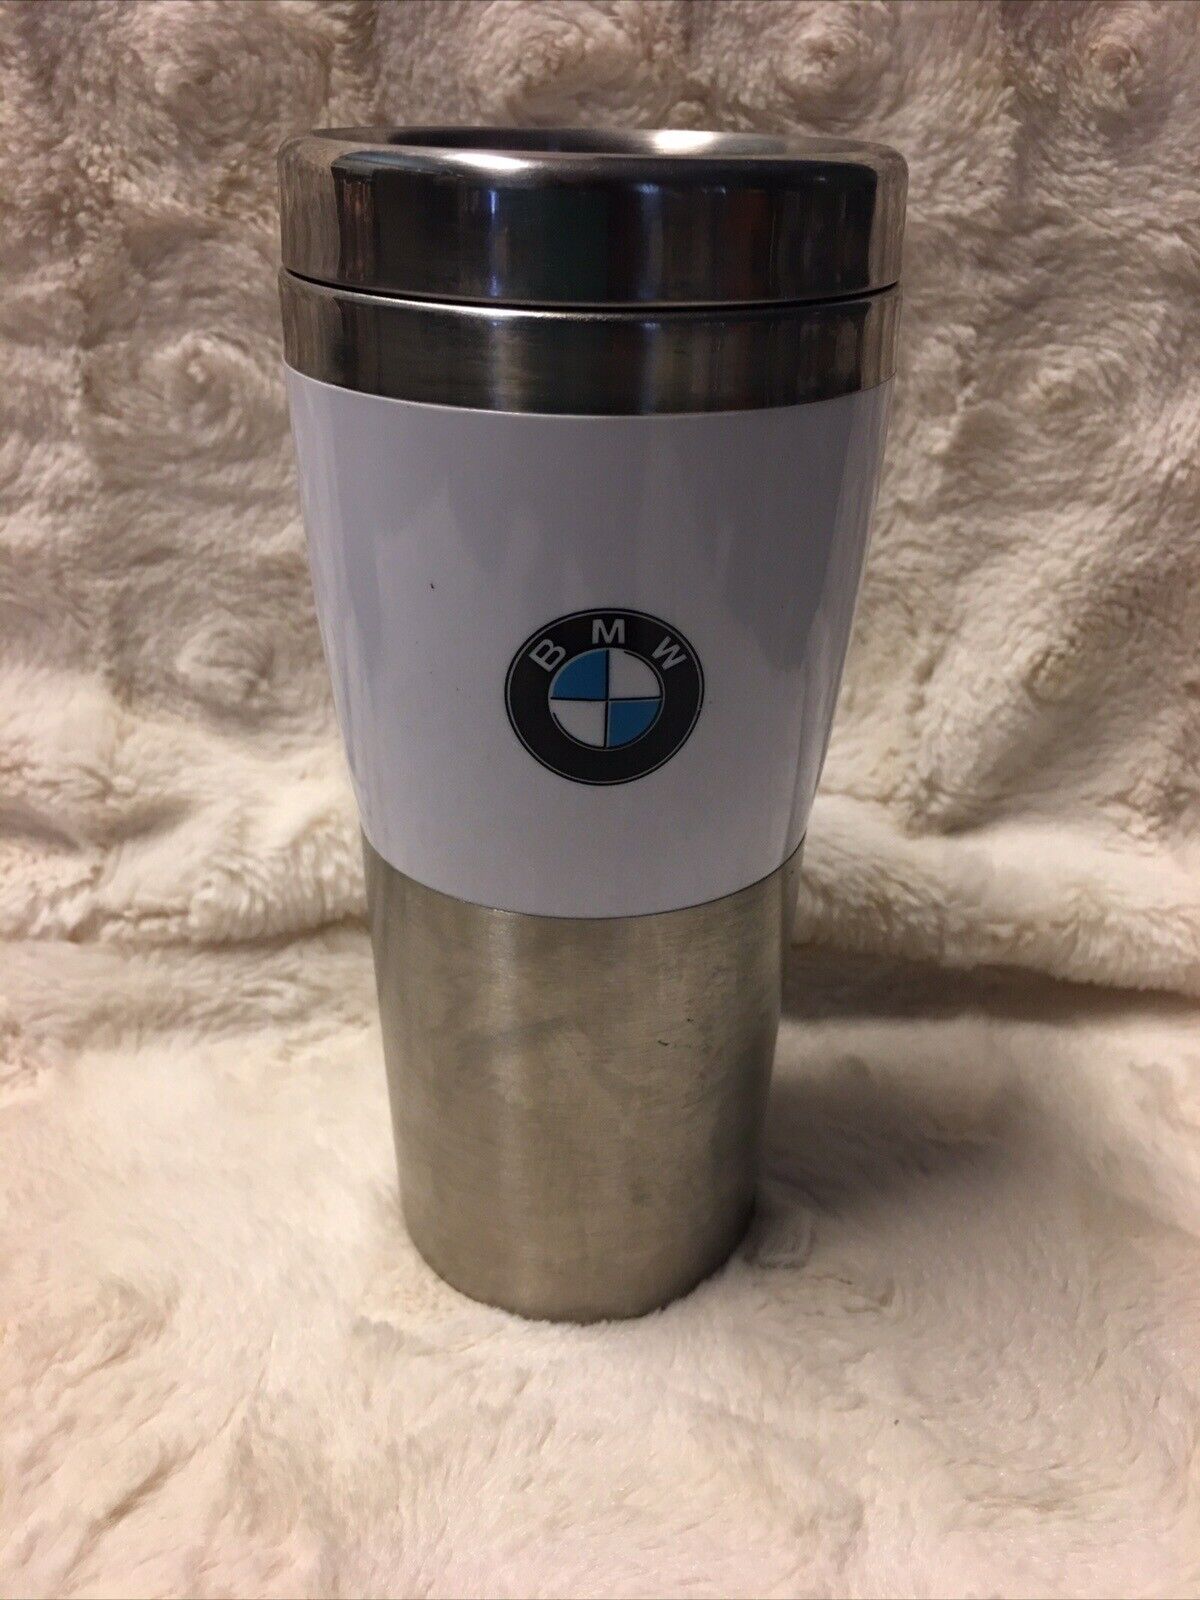 BMW cup coffee metal cup